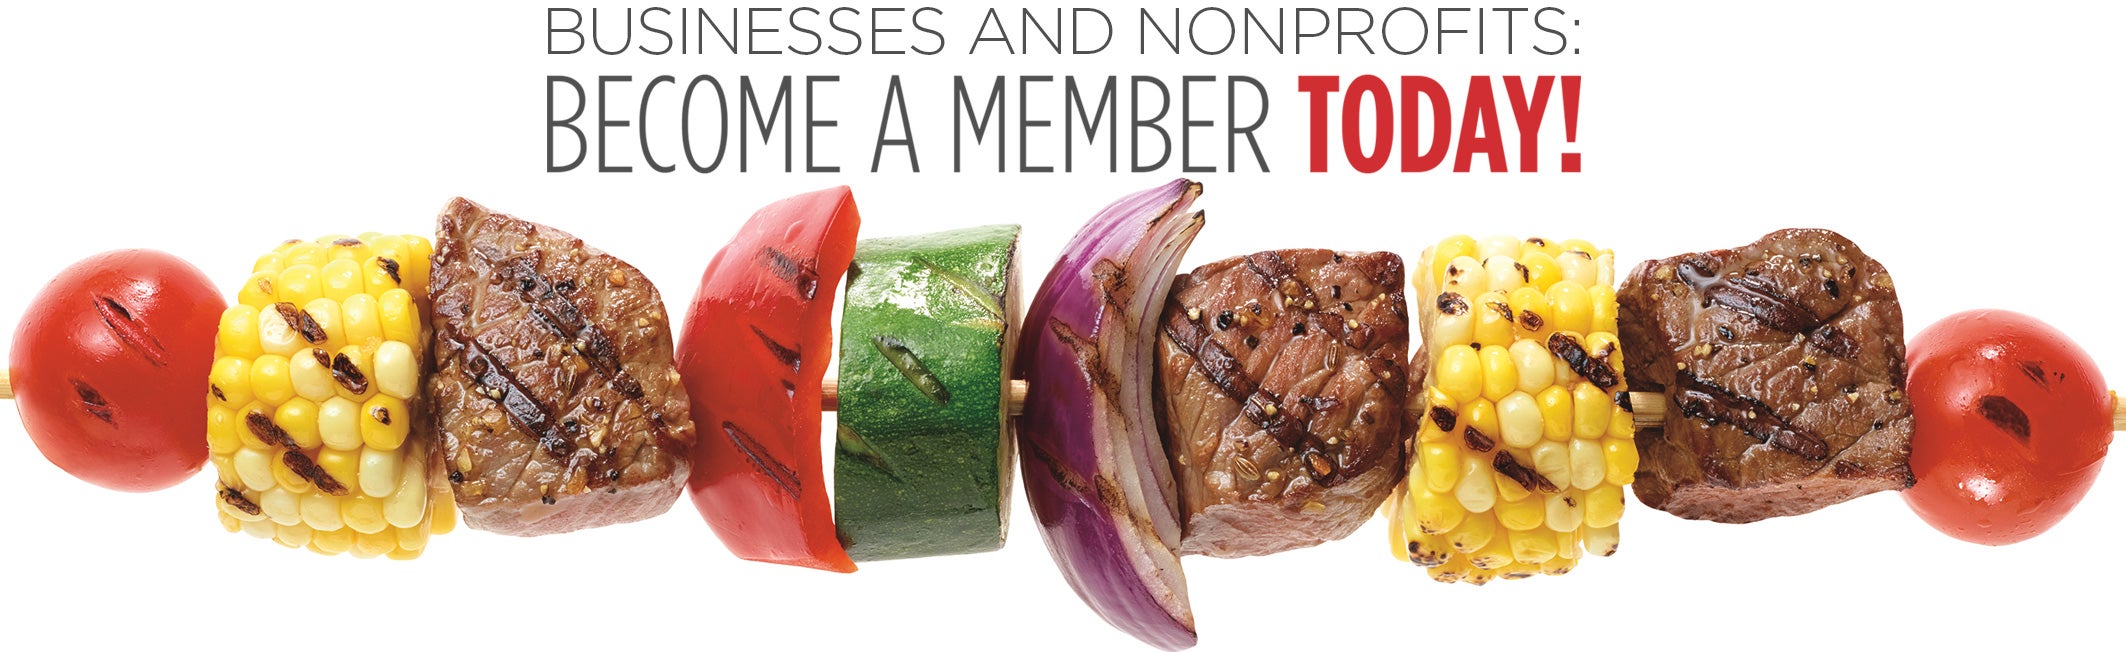 Businesses and Nonprofits: Become A Member Today!